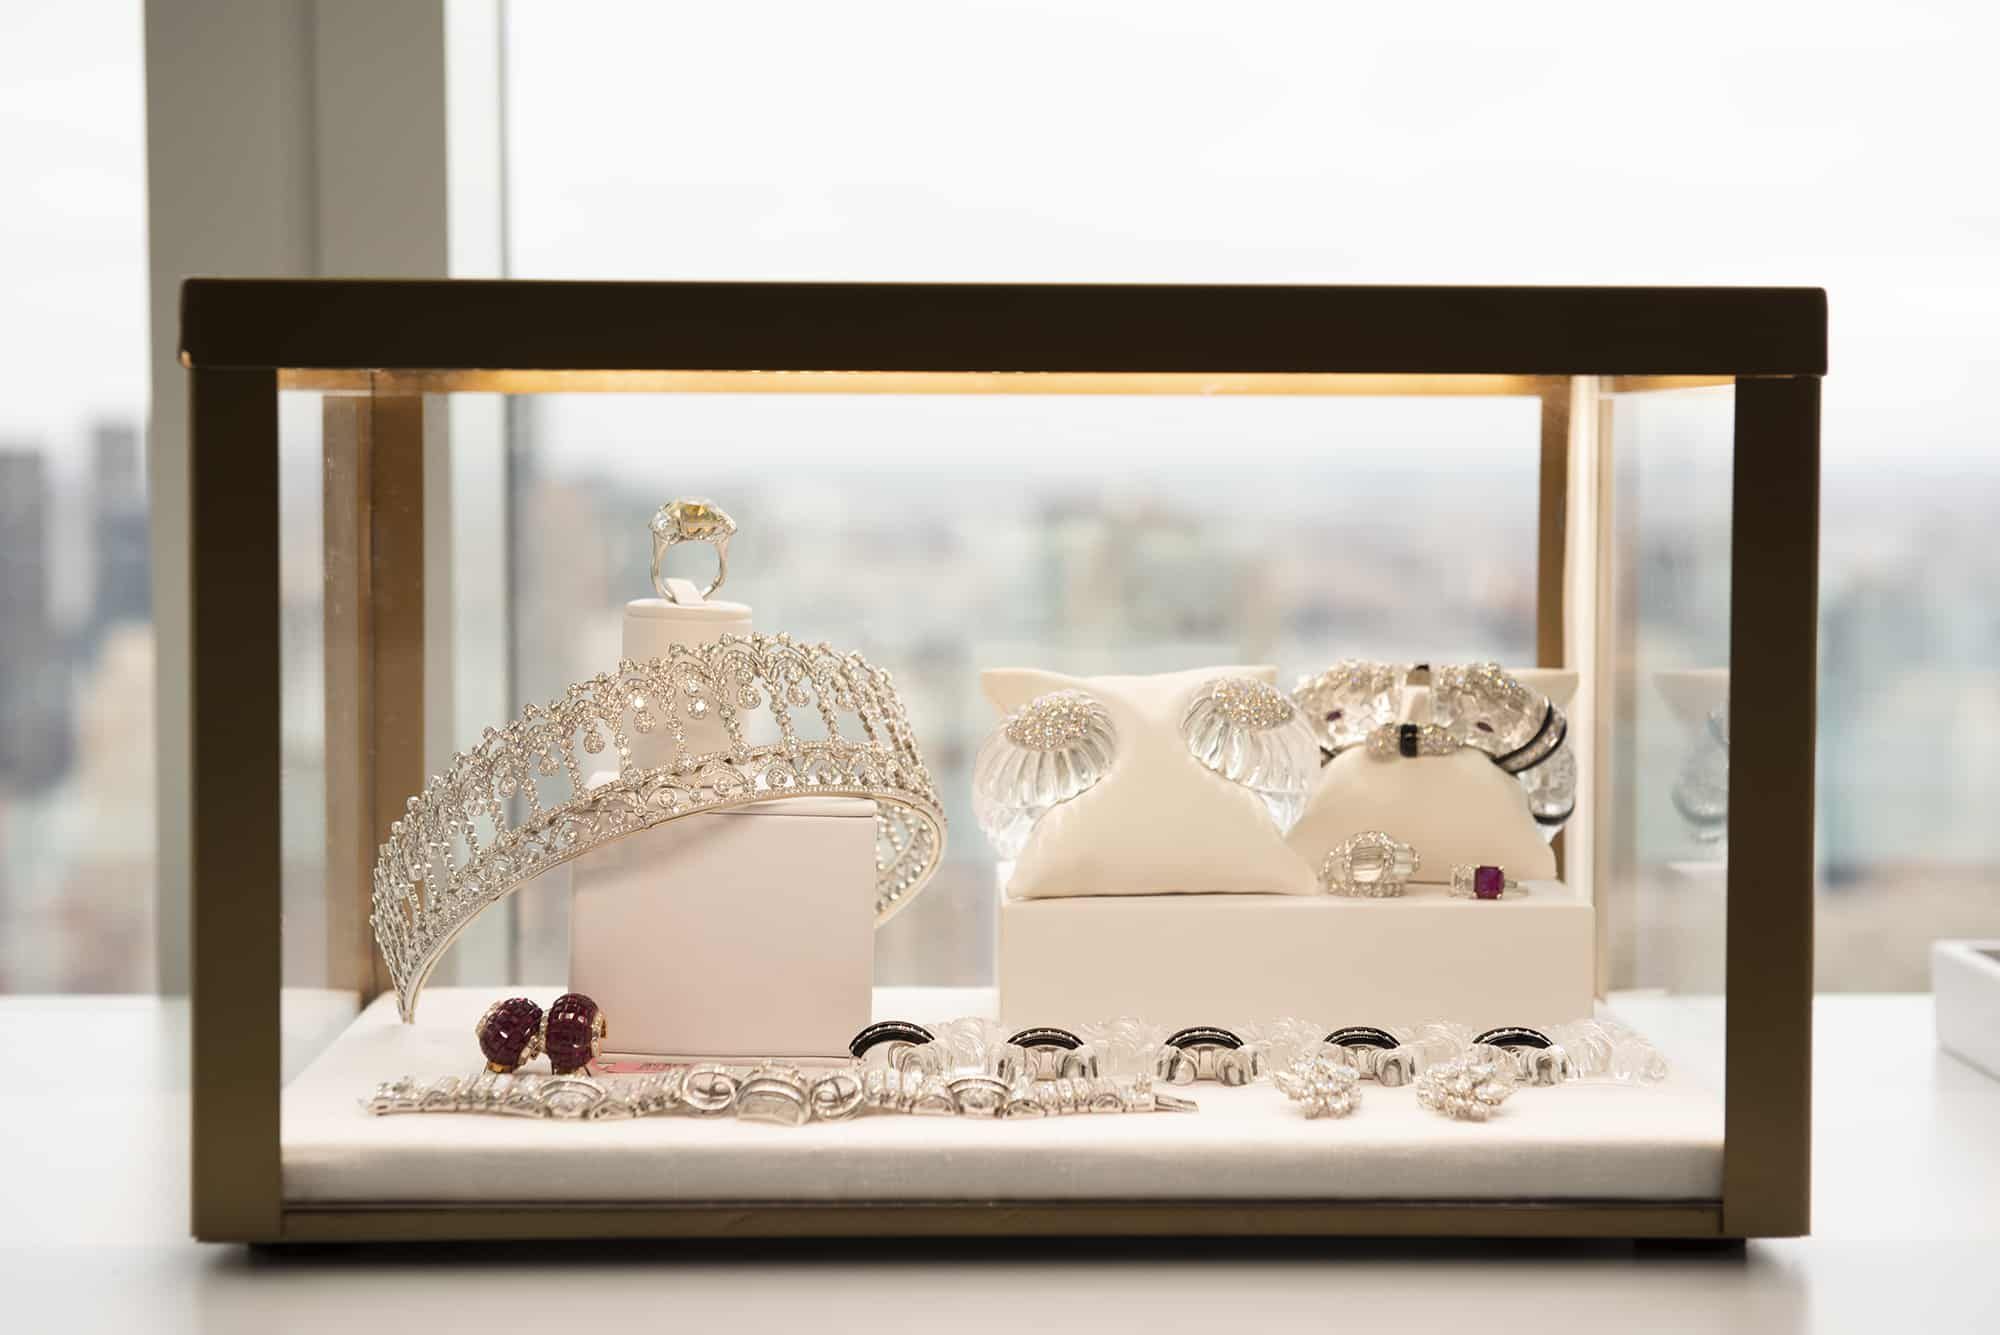 1stdibs Invited Gem and Watch Lovers to Be Dazzled during NYC Jewelry Week